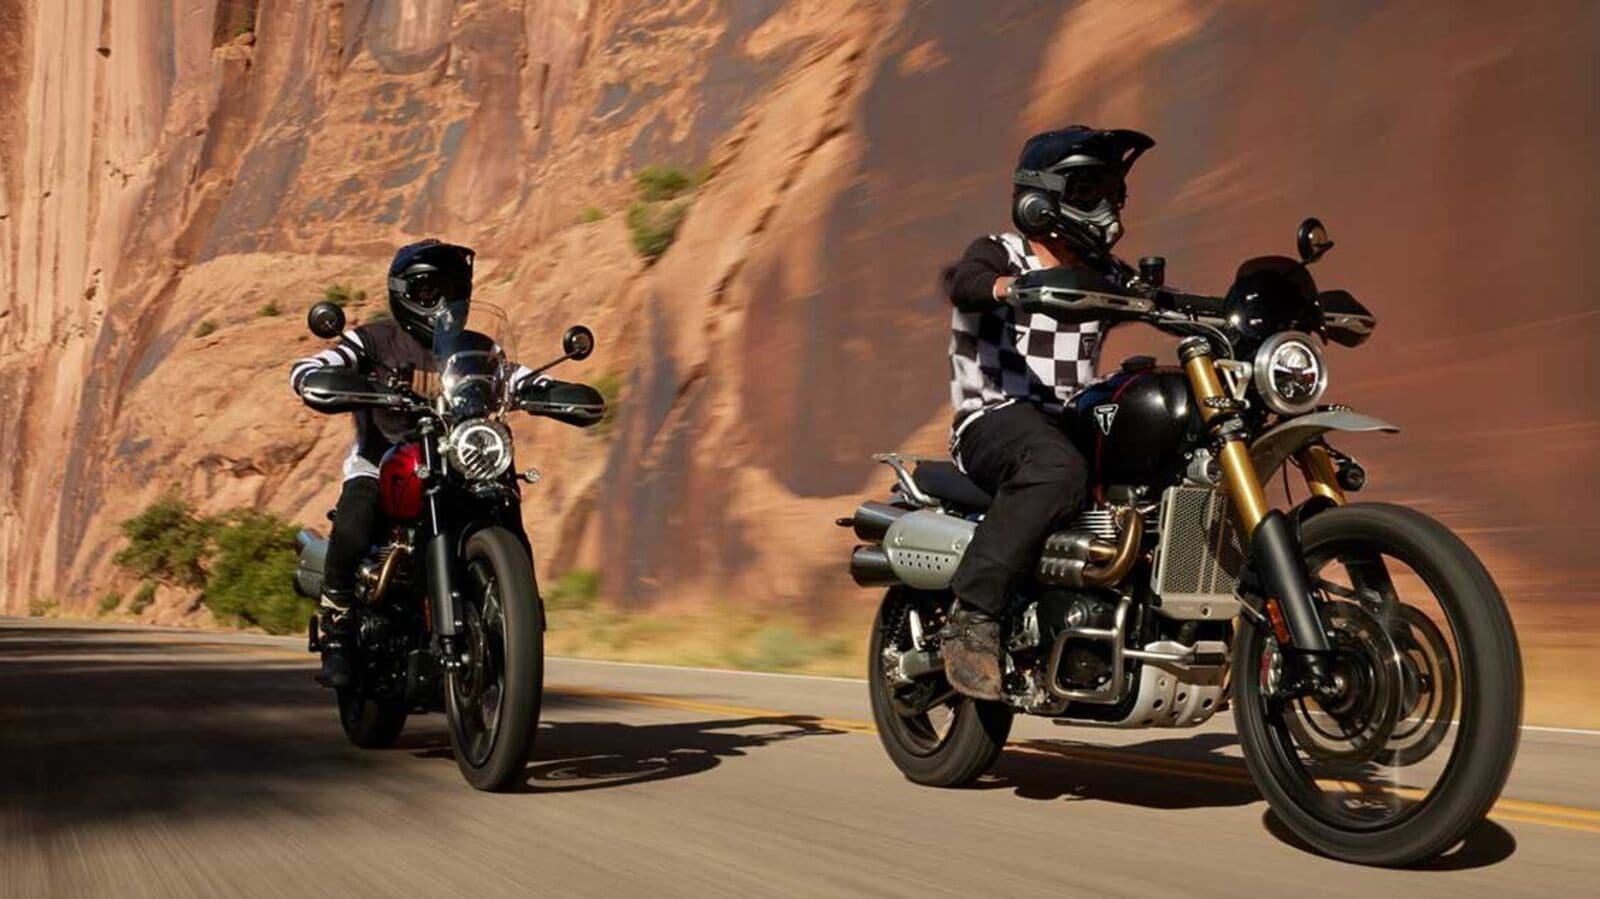 Triumph Scrambler 1200 X launched at ₹11.83 lakh. Check what’s new